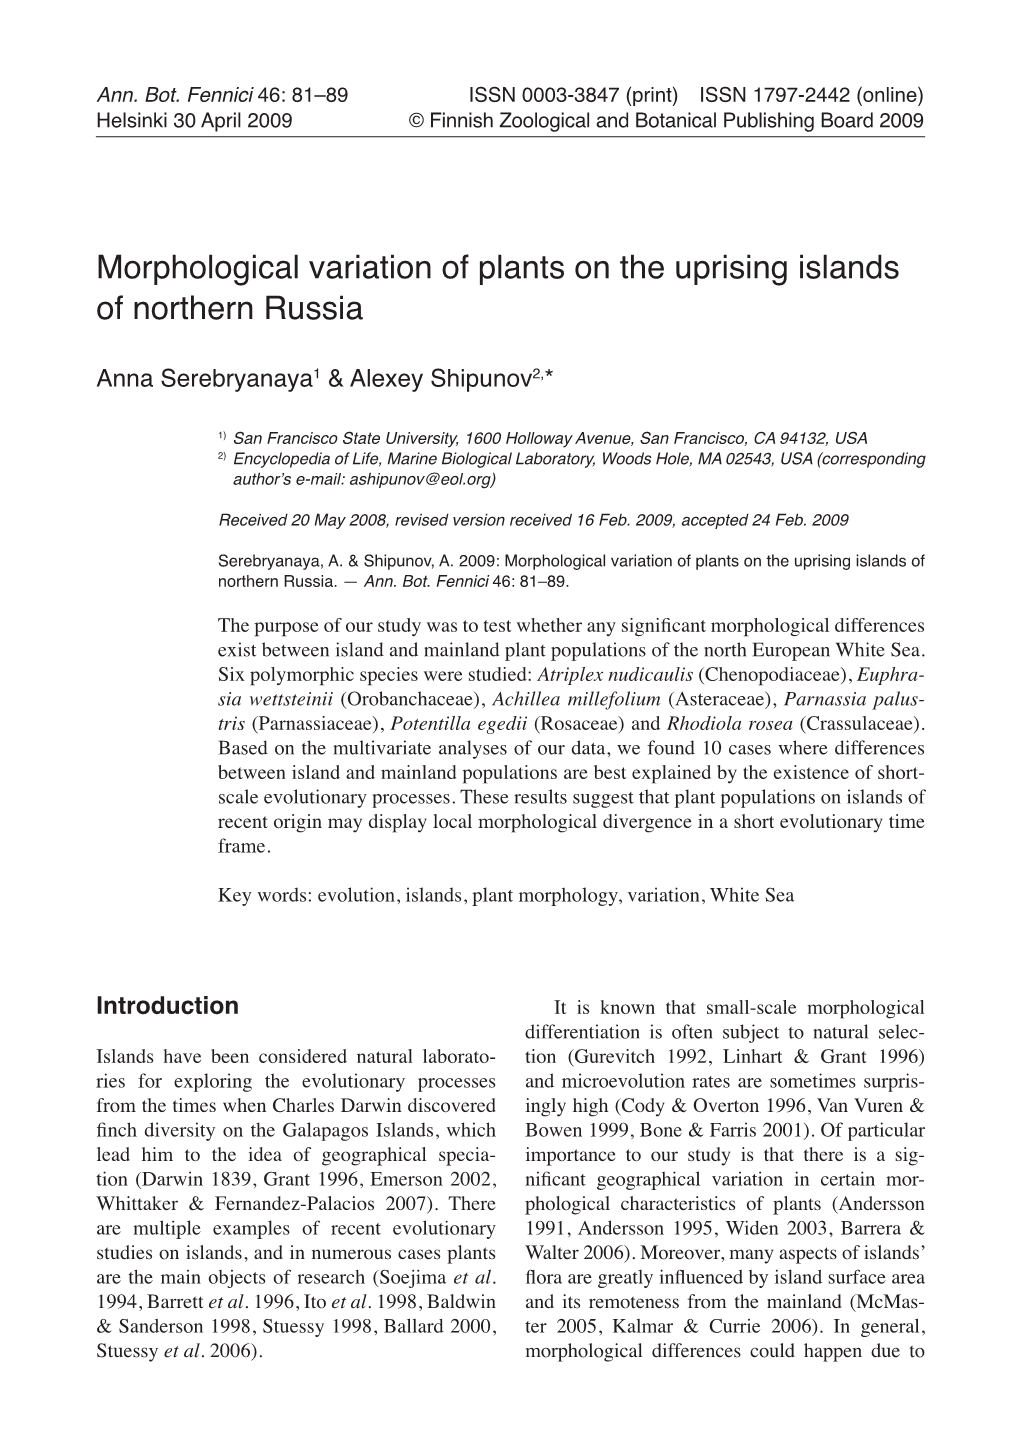 Morphological Variation of Plants on the Uprising Islands of Northern Russia